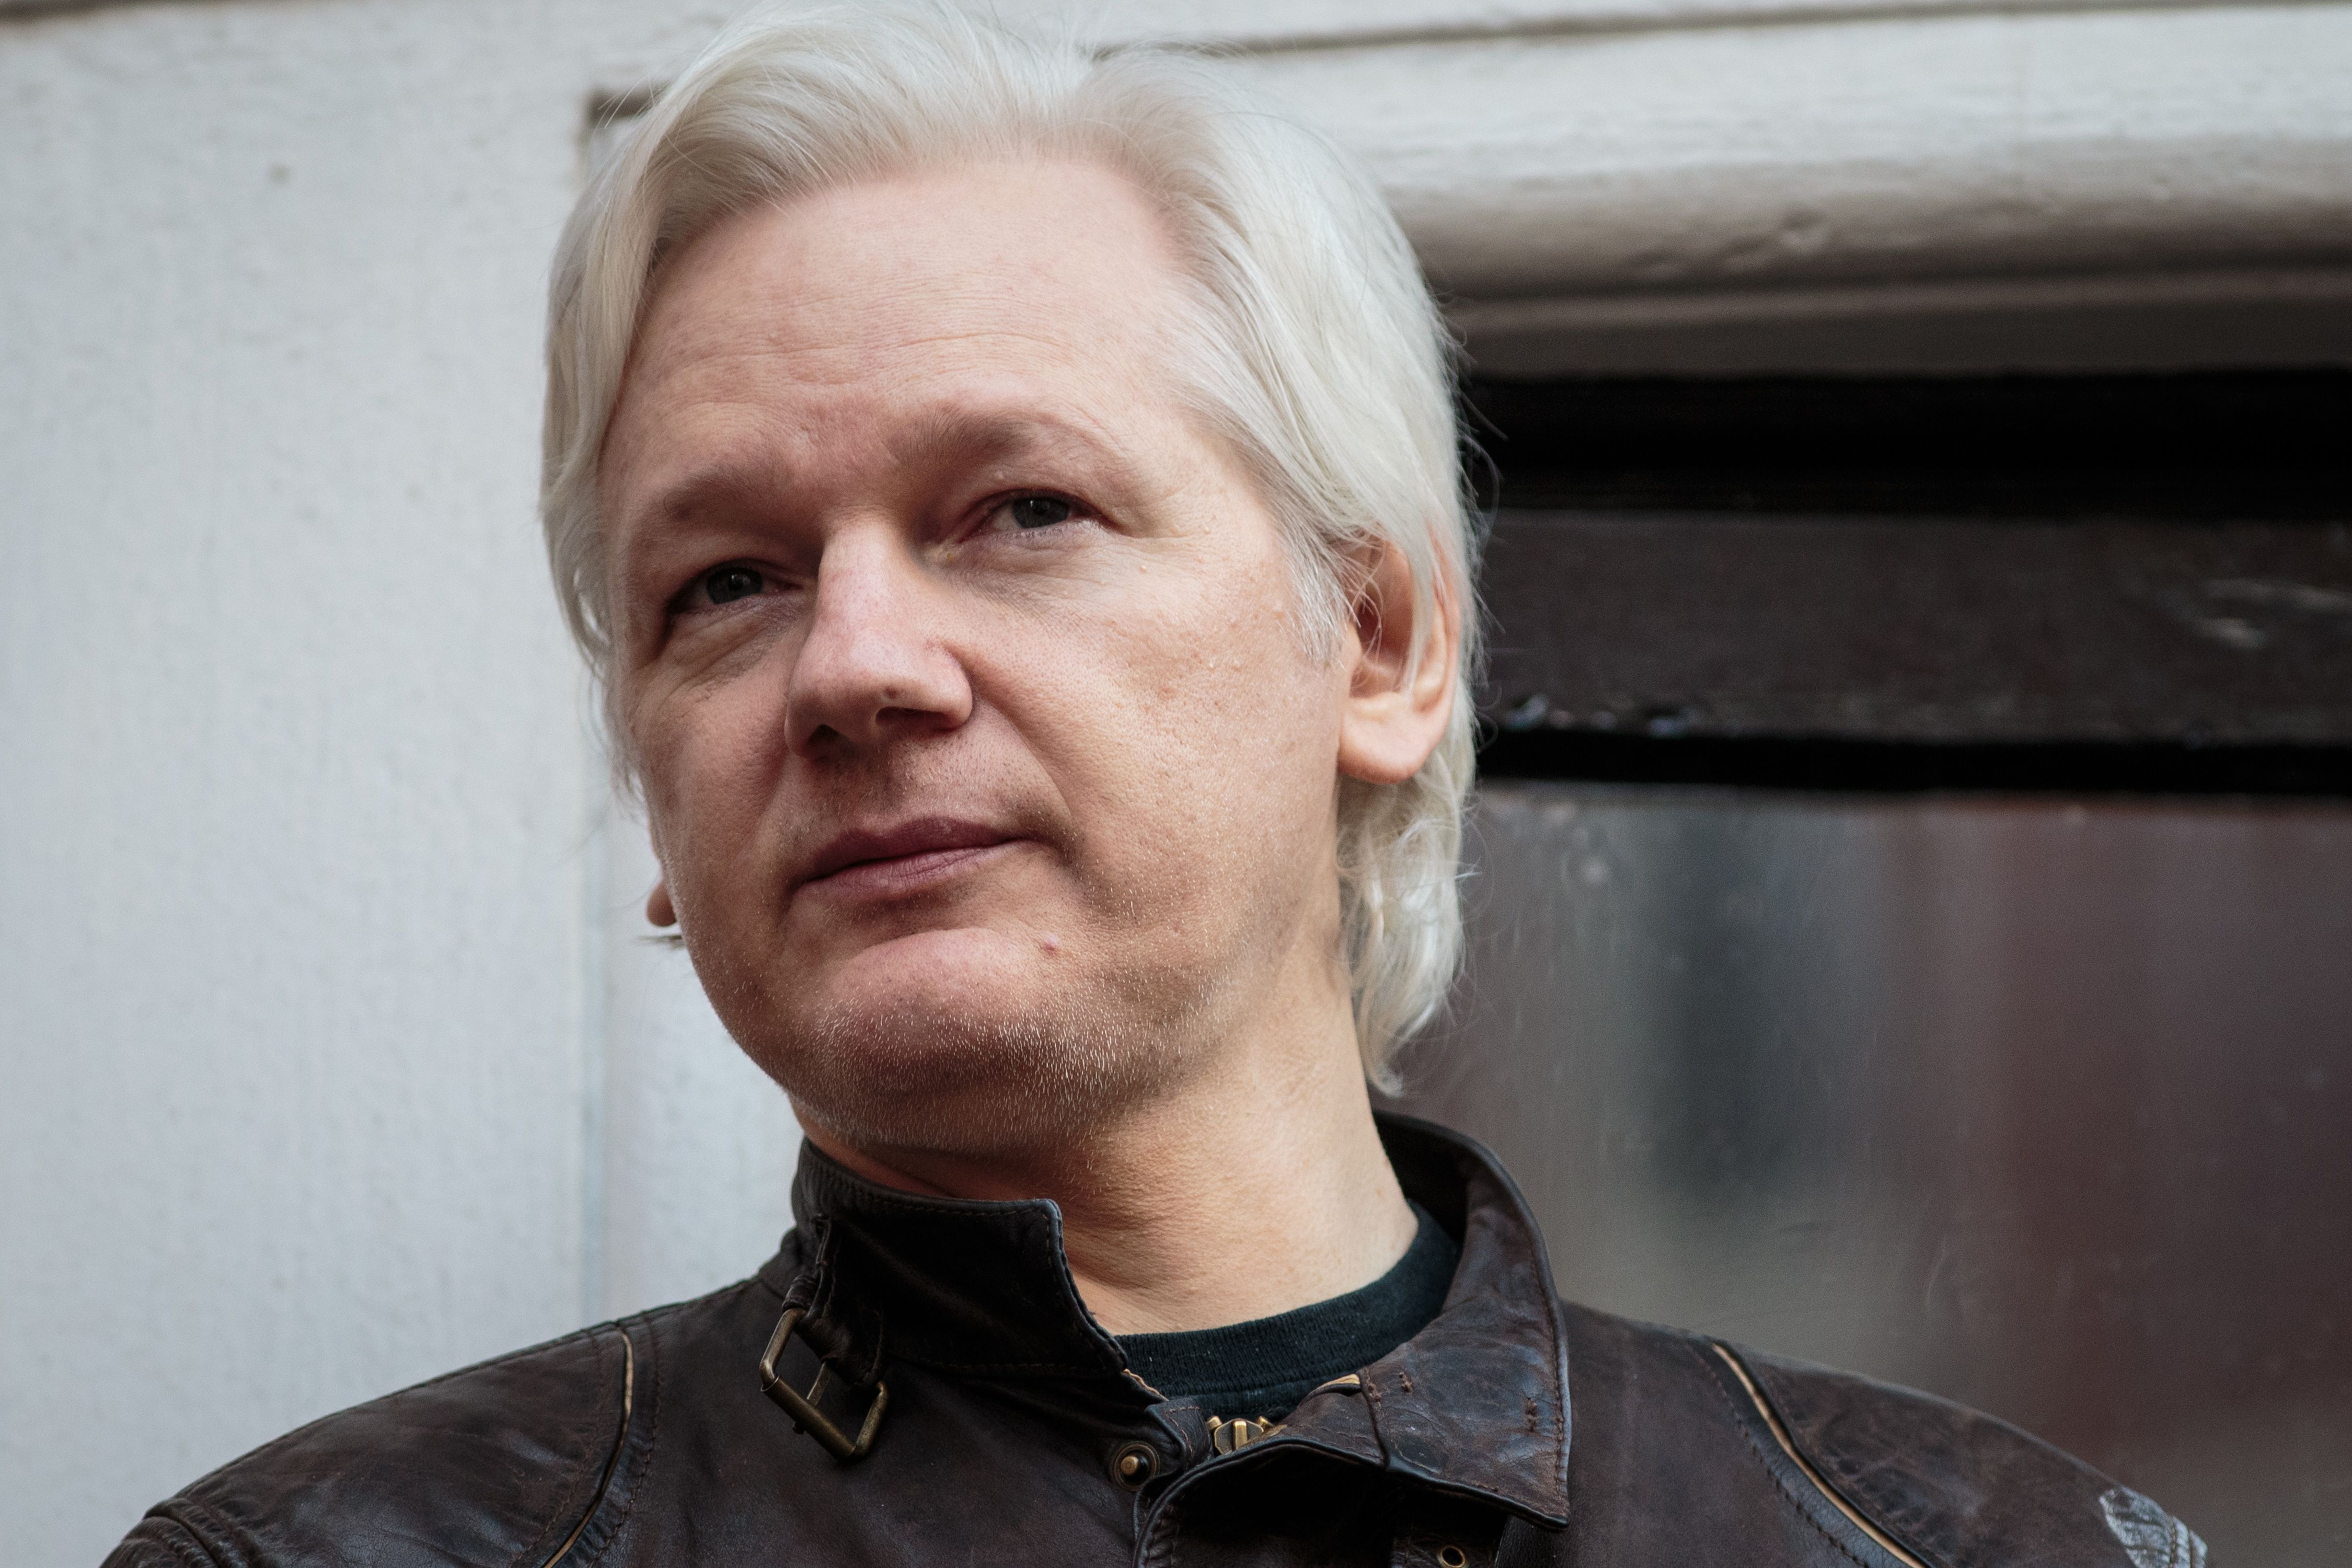 US prosecutors have revealed the existence of a sealed indictment against Julian Assange